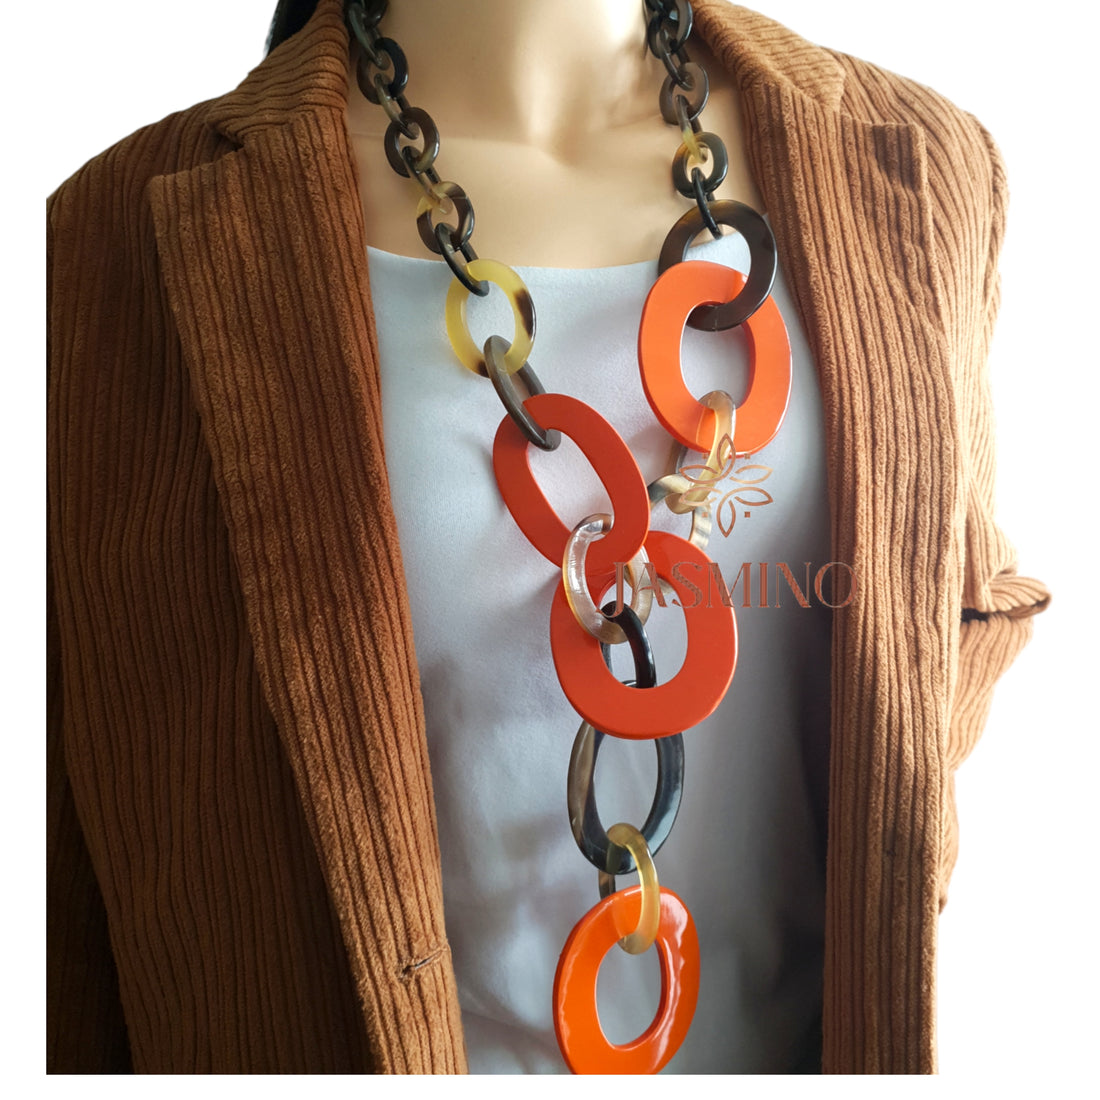 Jasmino Unique Meaningful Gift Collection For Her Orange Chain Necklace Made By Natural Buffalo Horn